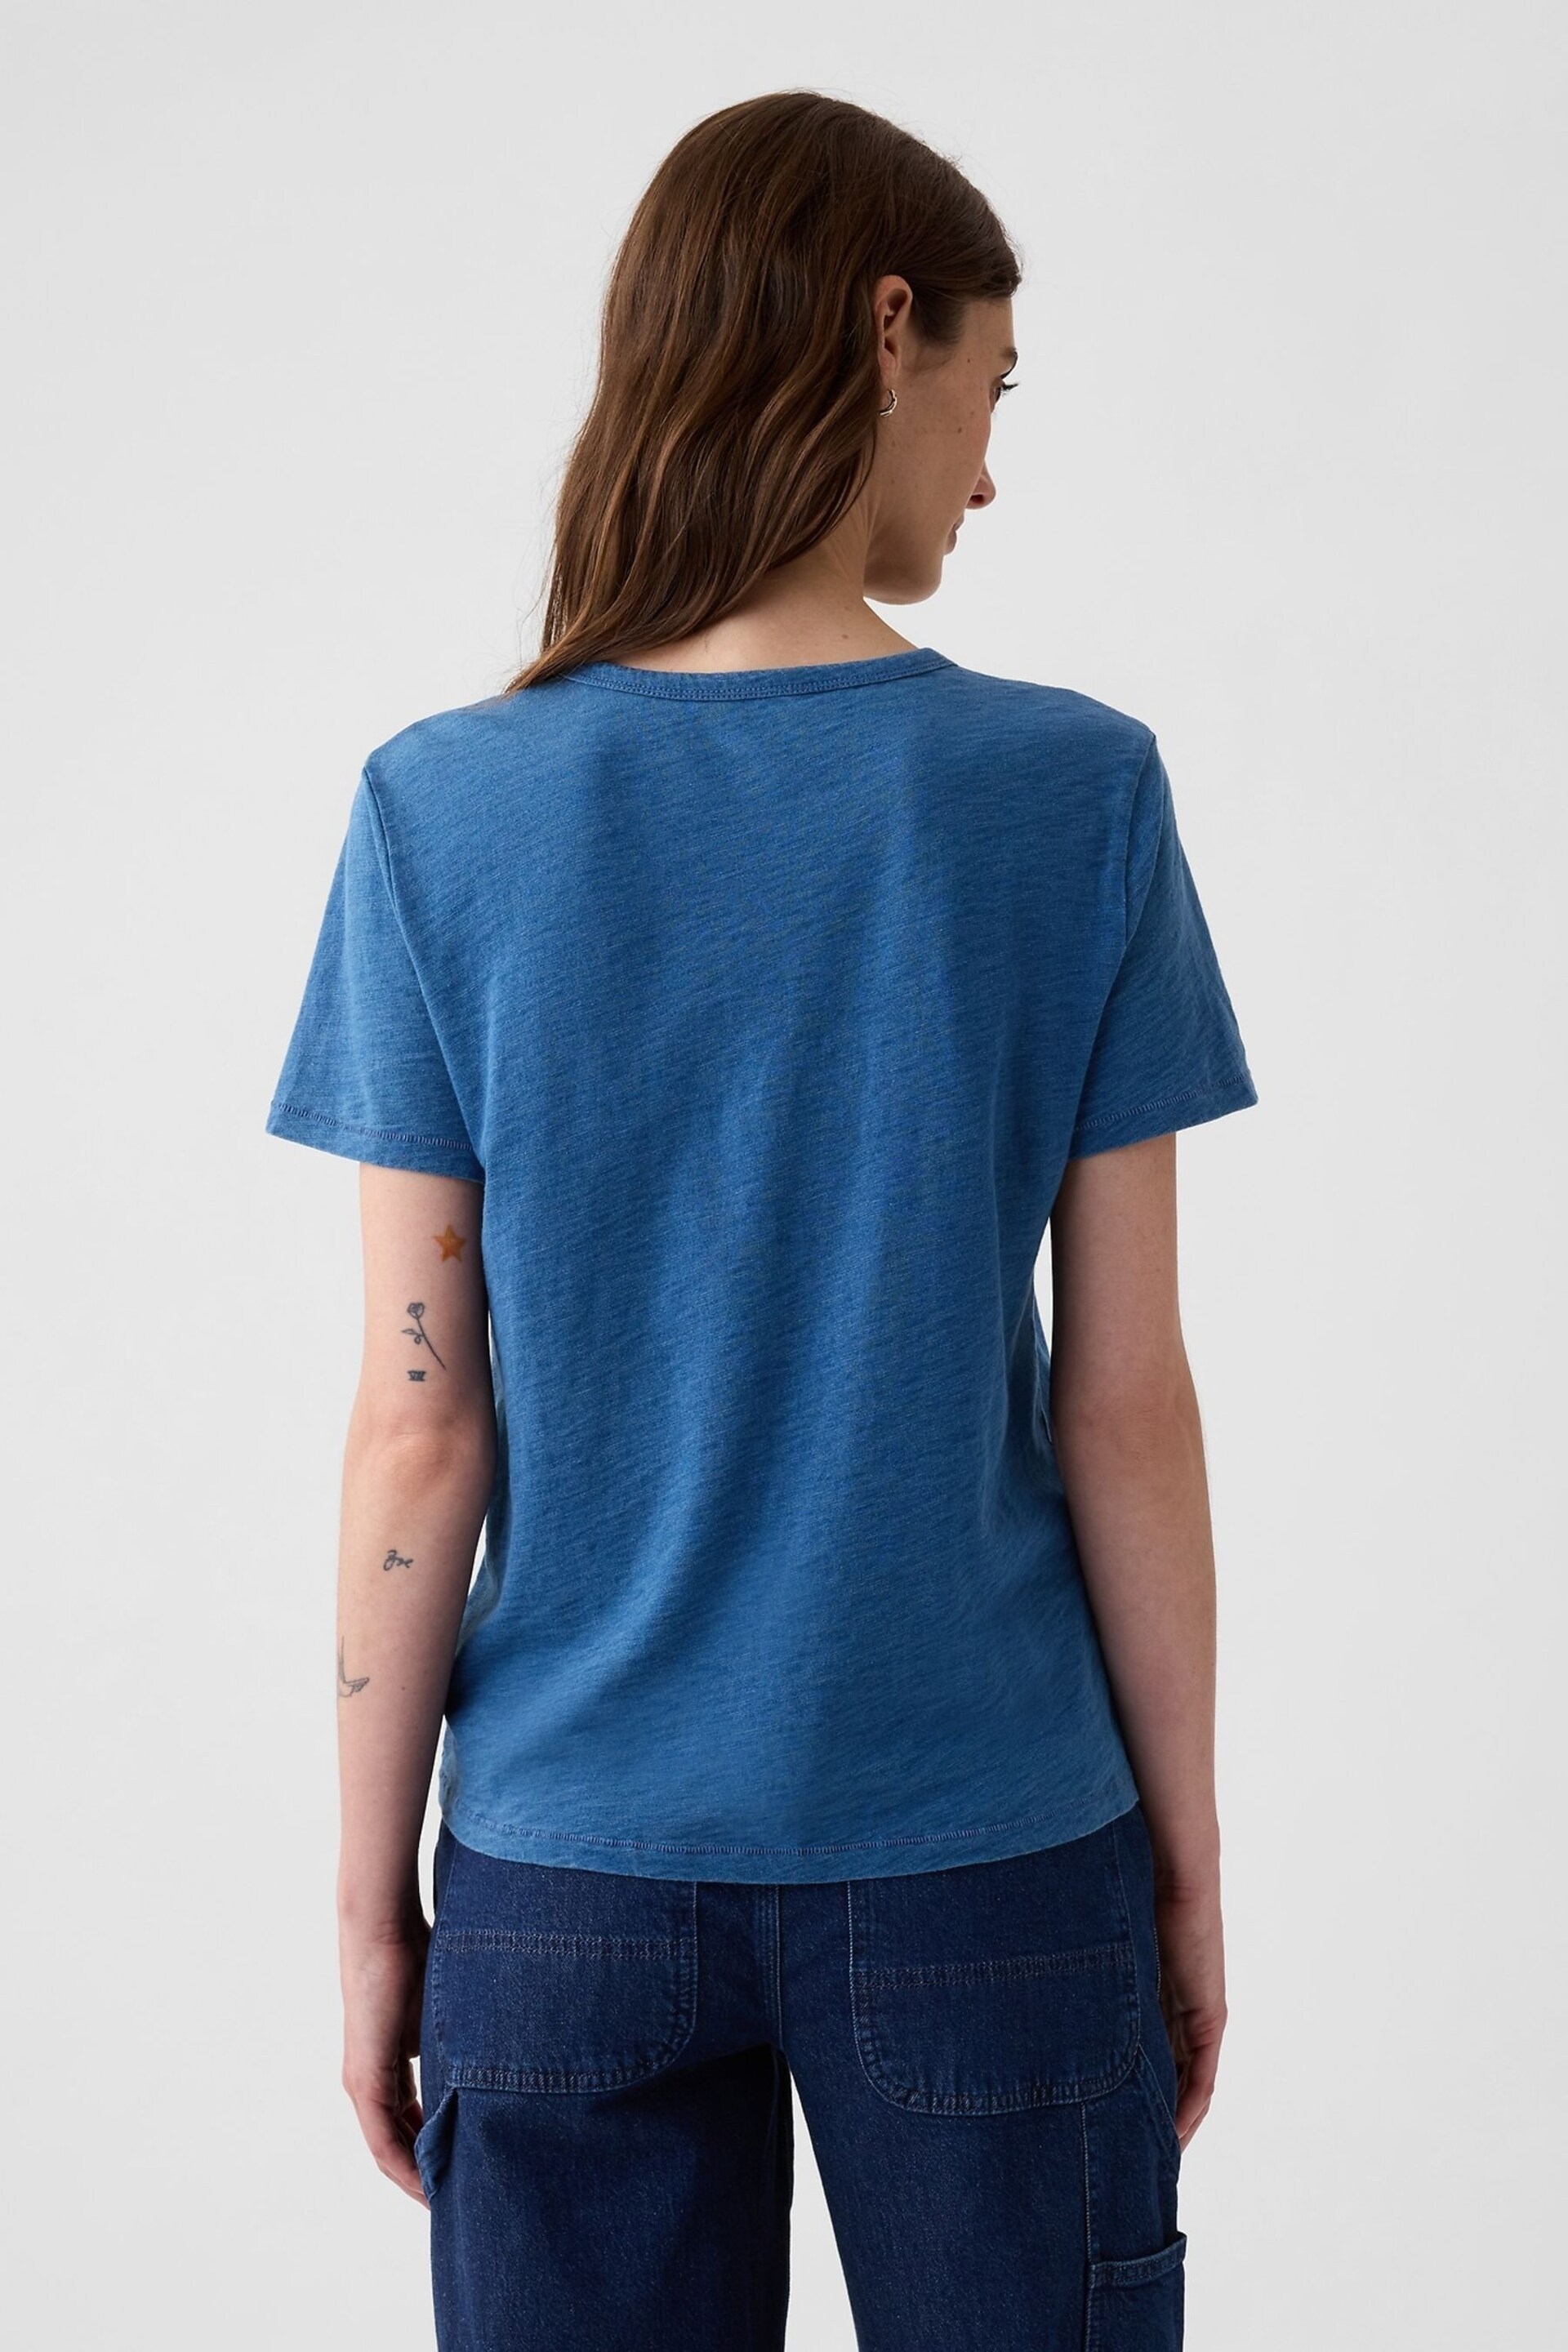 Gap Blue Cotton Relaxed Short Sleeve T-Shirt - Image 2 of 4